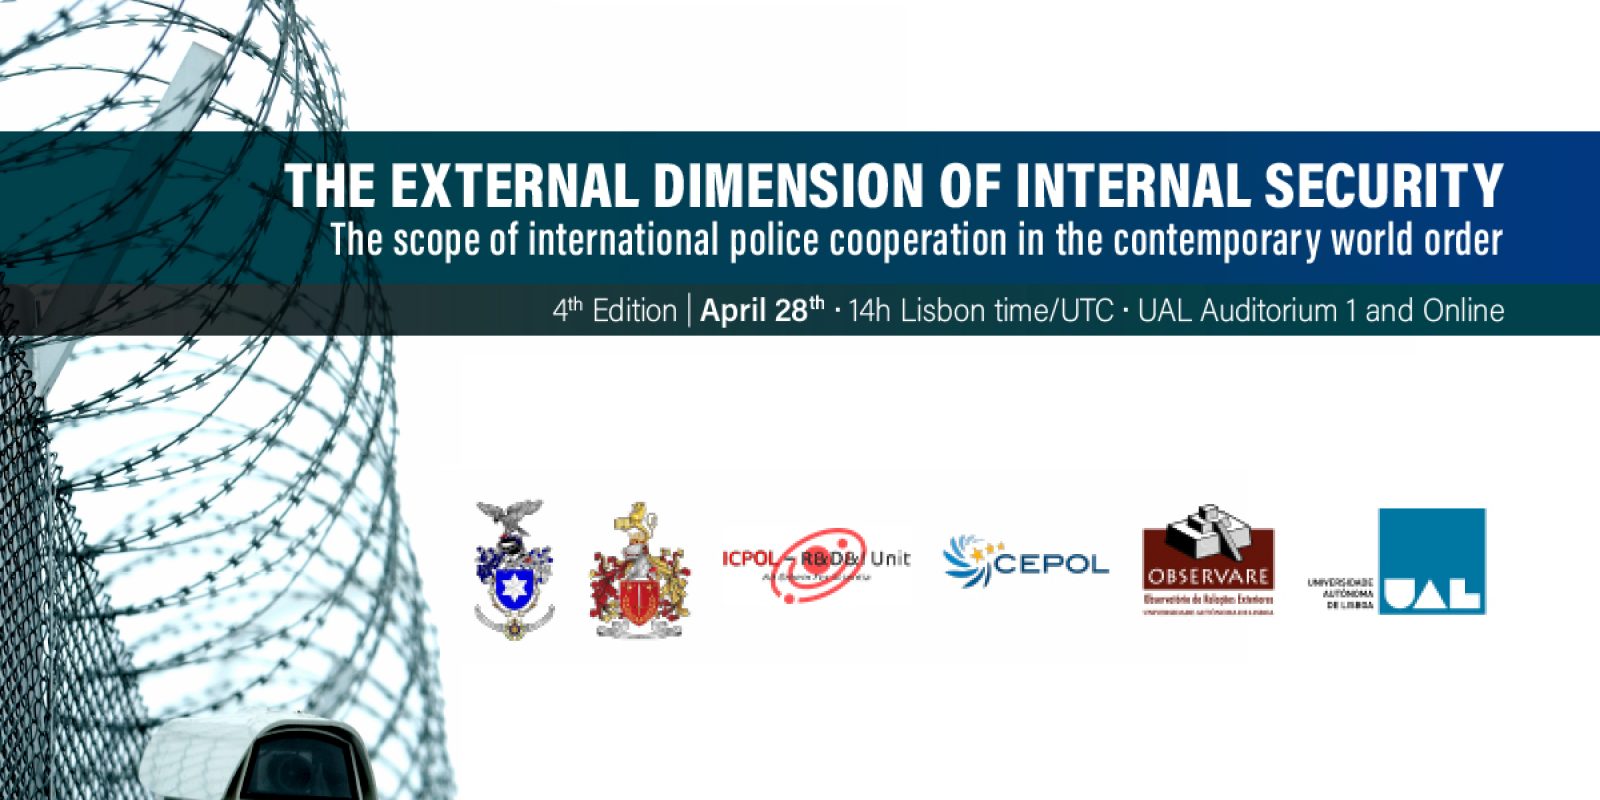 THE EXTERNAL DIMENSION OF INTERNAL SECURITY – THE SCOPE OF INTERNATIONAL POLICE COOPERATION IN THE CONTEMPORARY WORLD ORDER